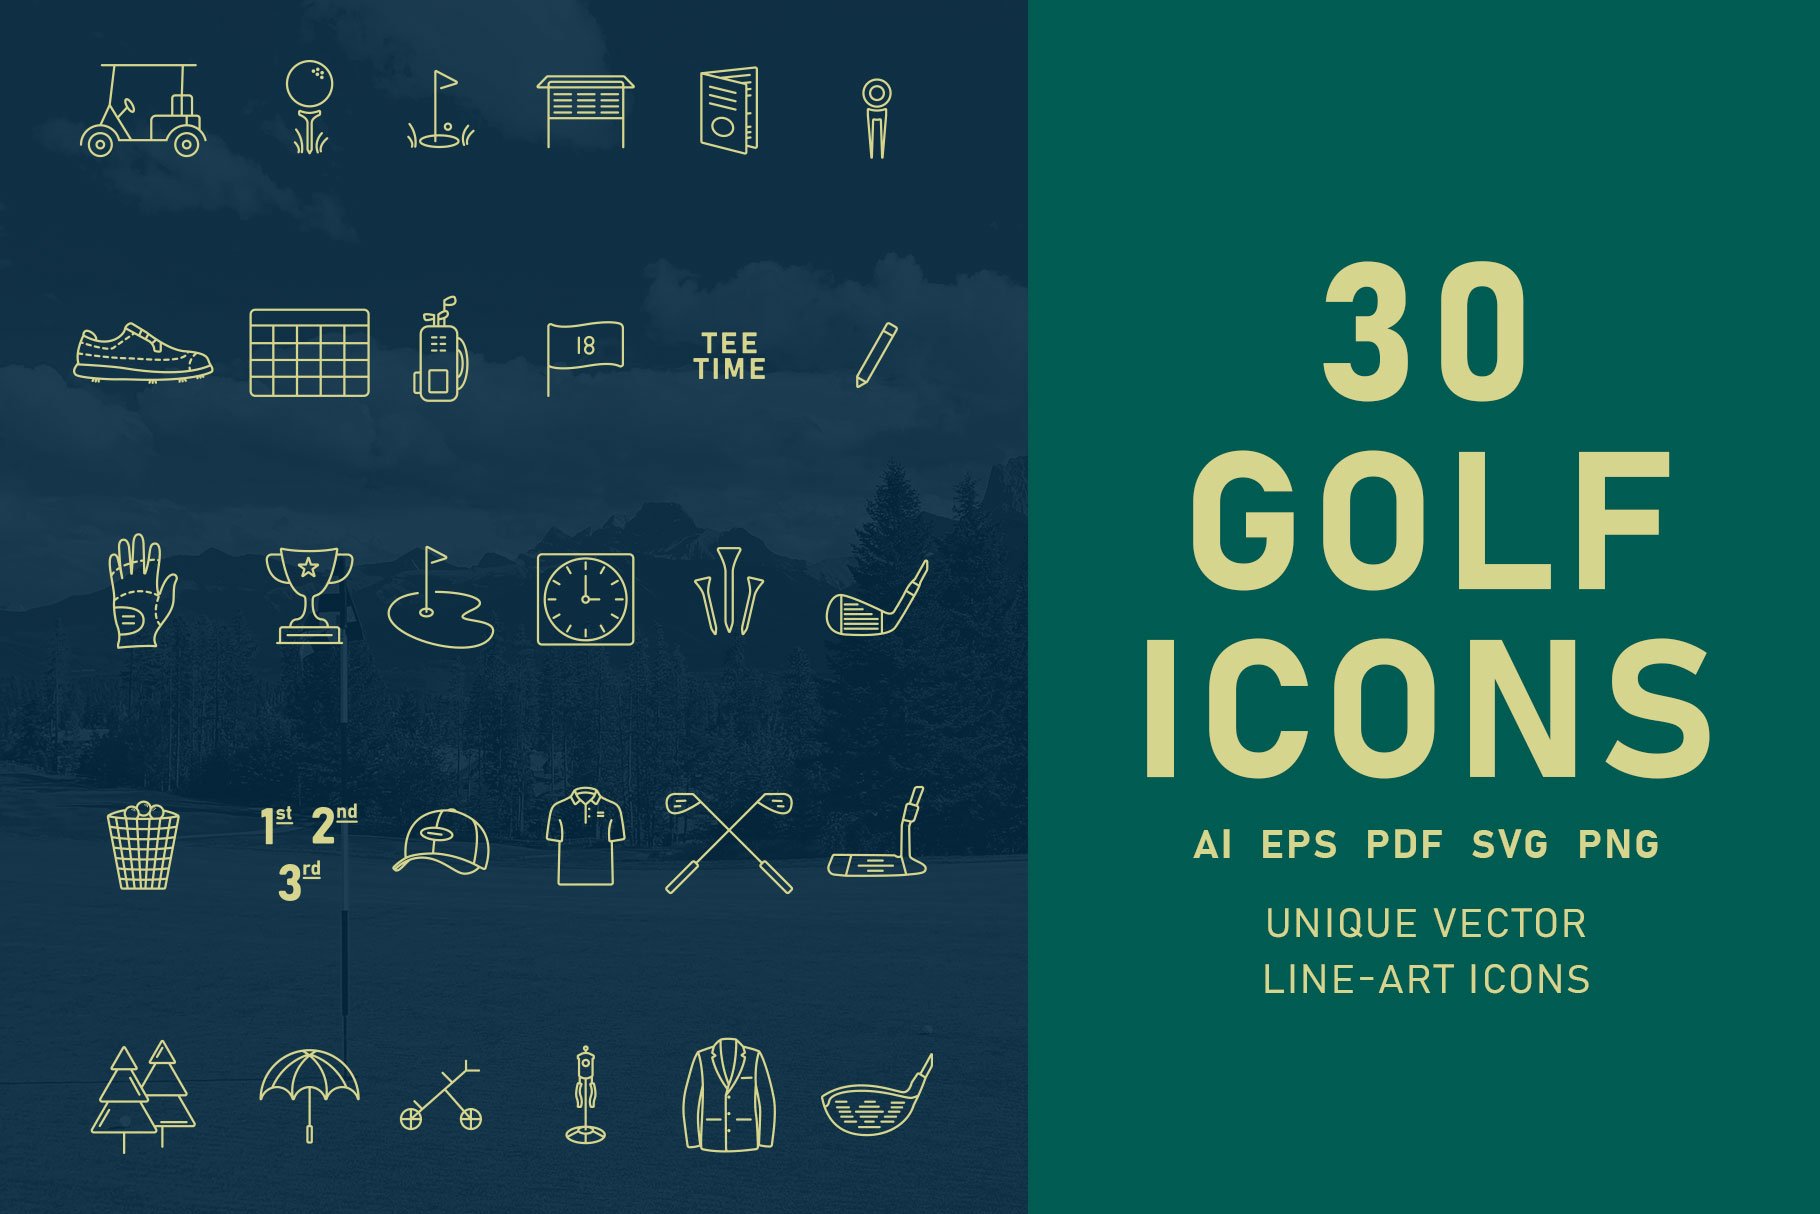 30 Golf Icons cover image.